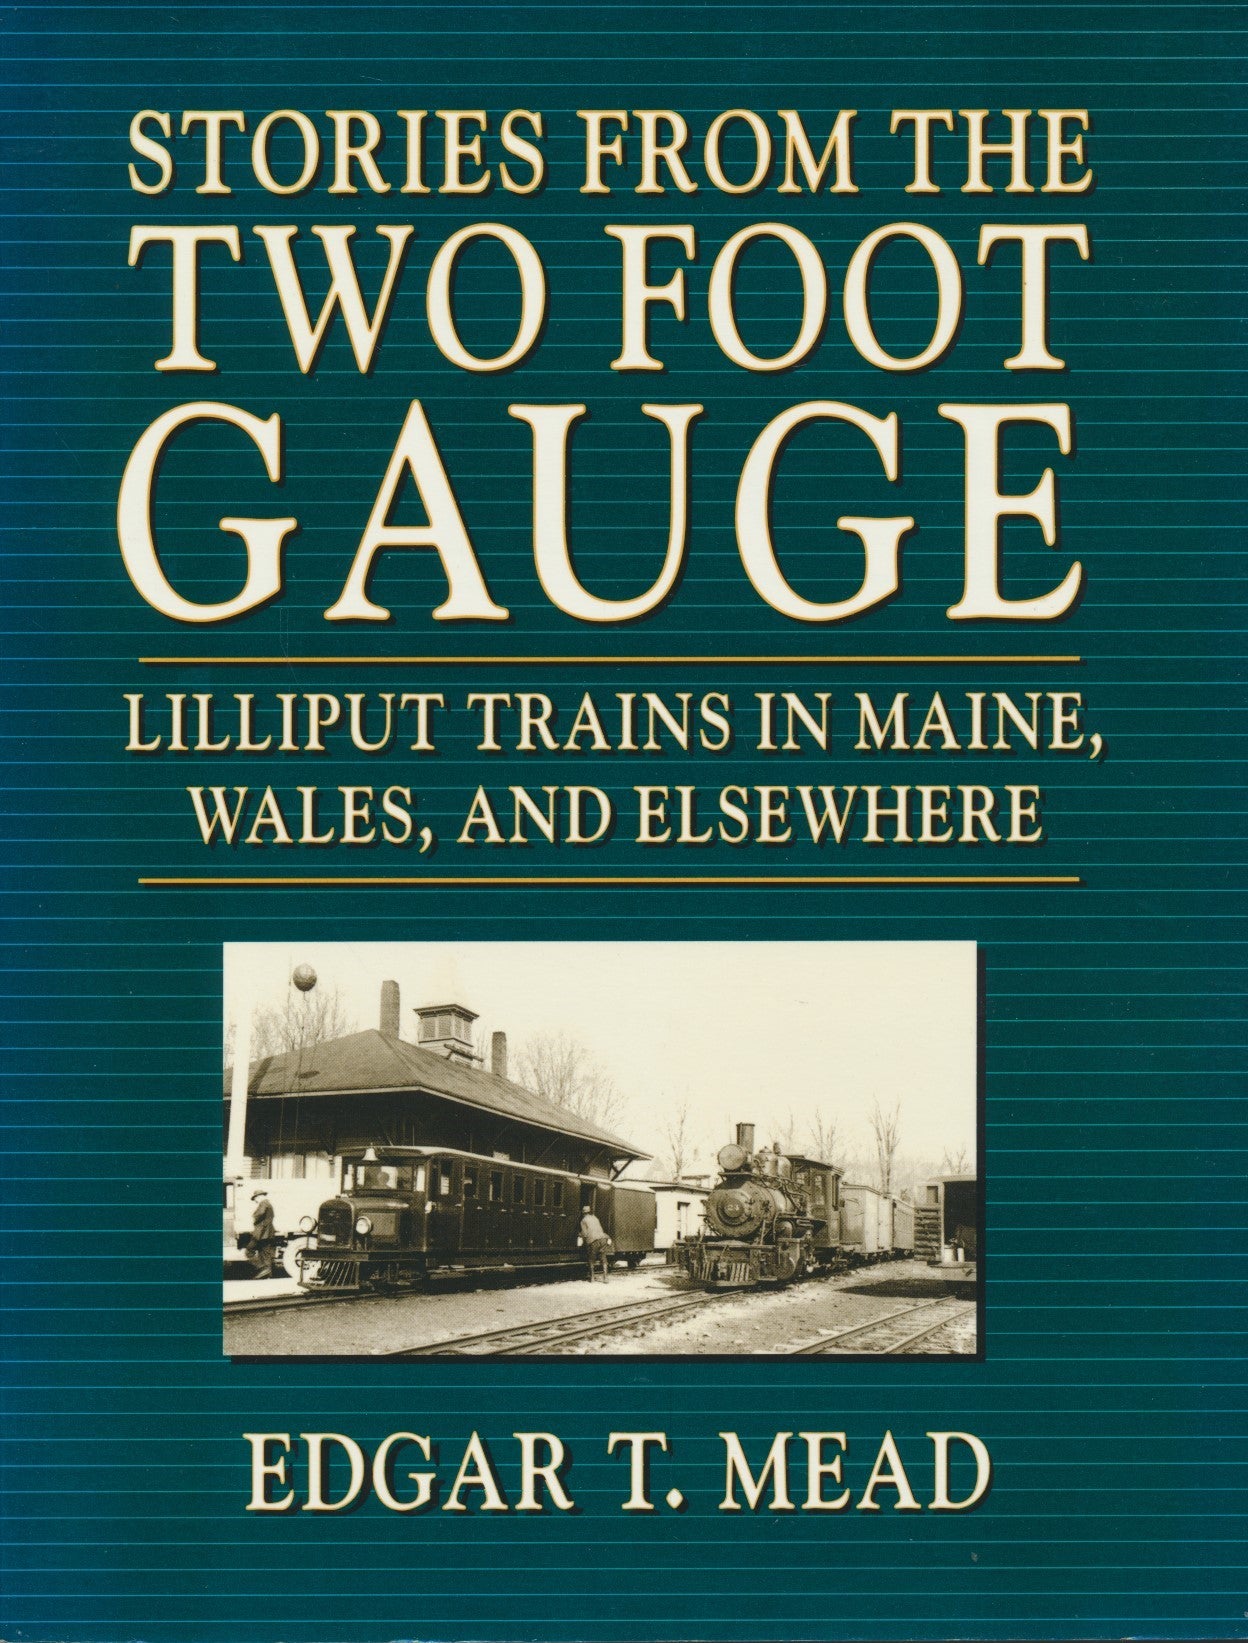 Stories from the Two Foot Gauge